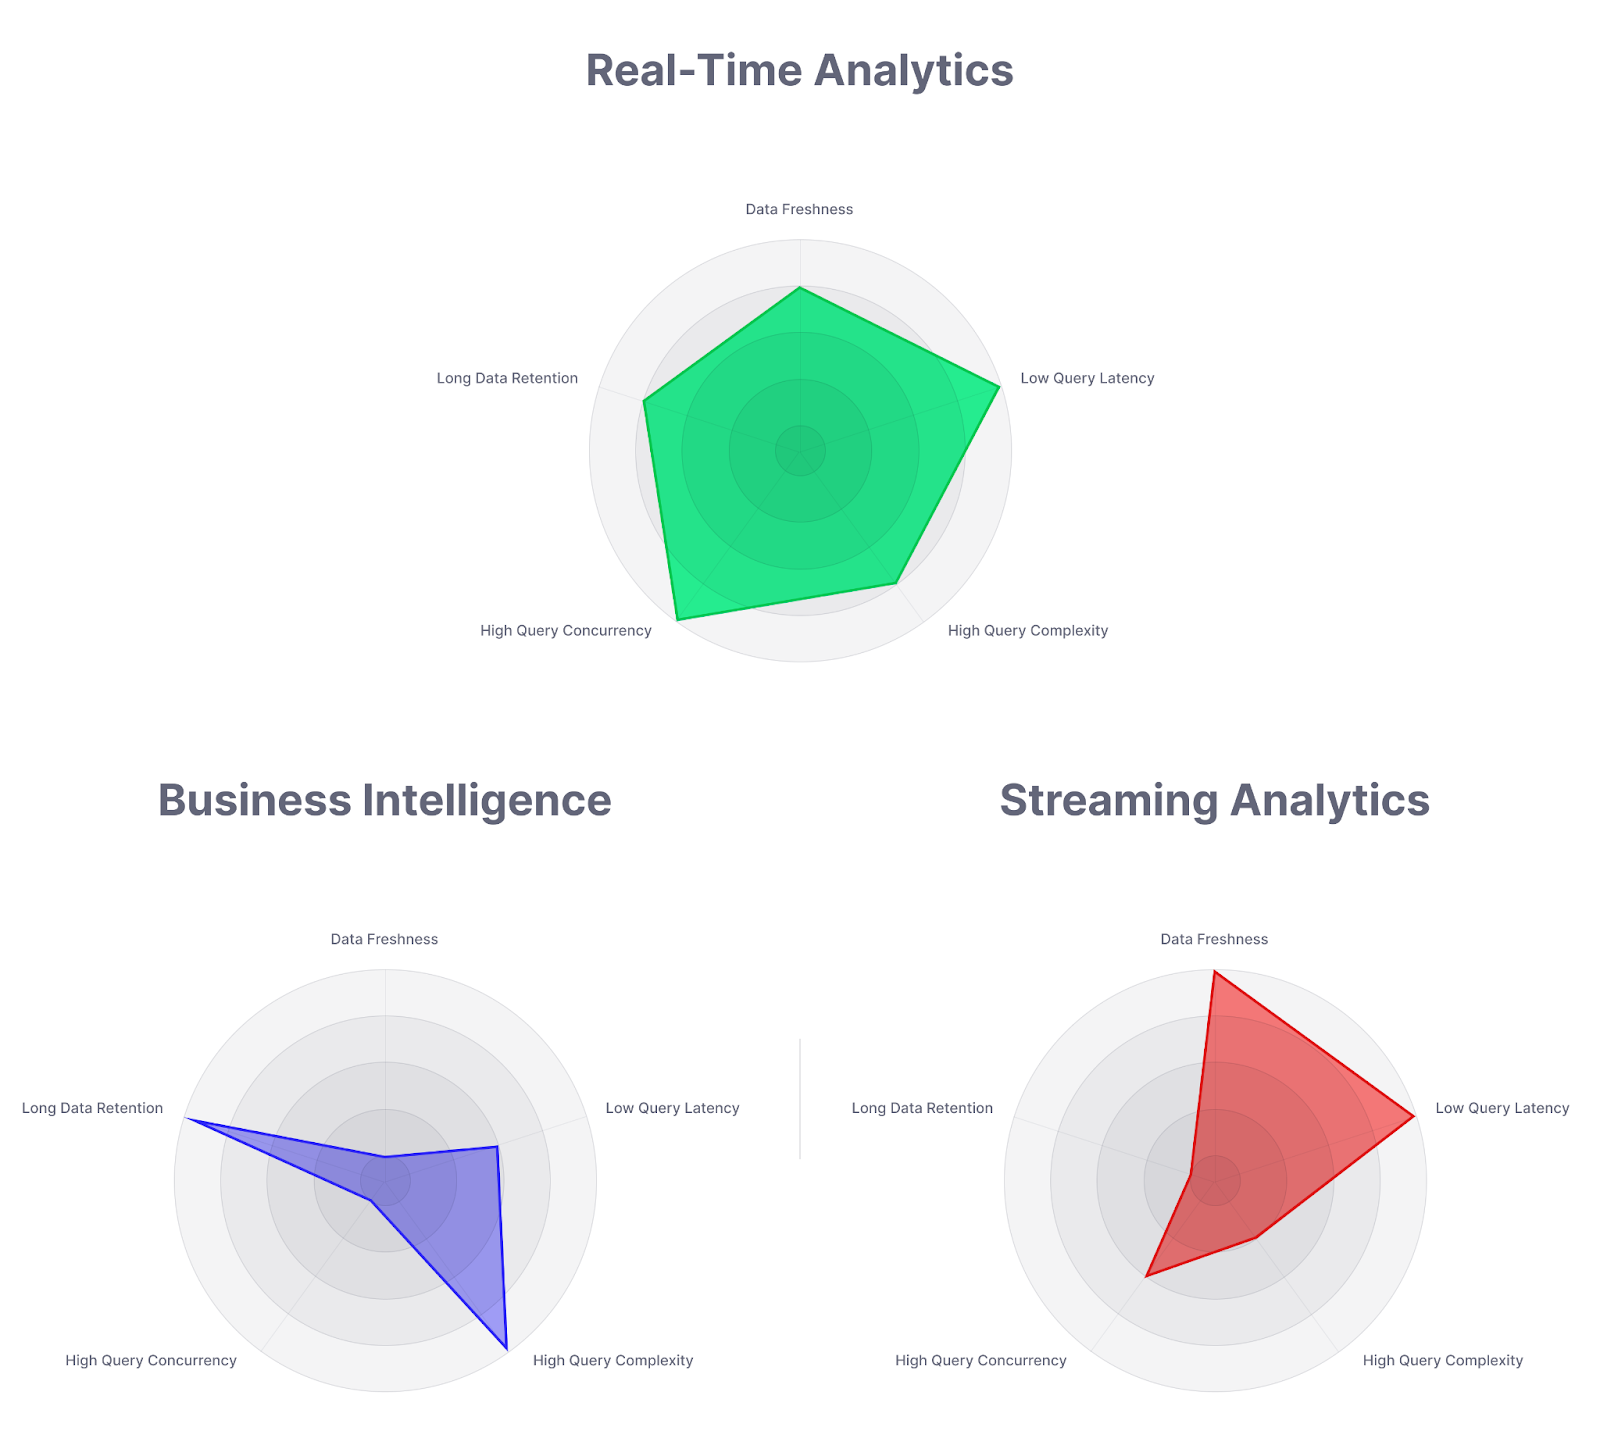 An illustration of the differences between real-time analytics, business intelligence, and streaming analytics.